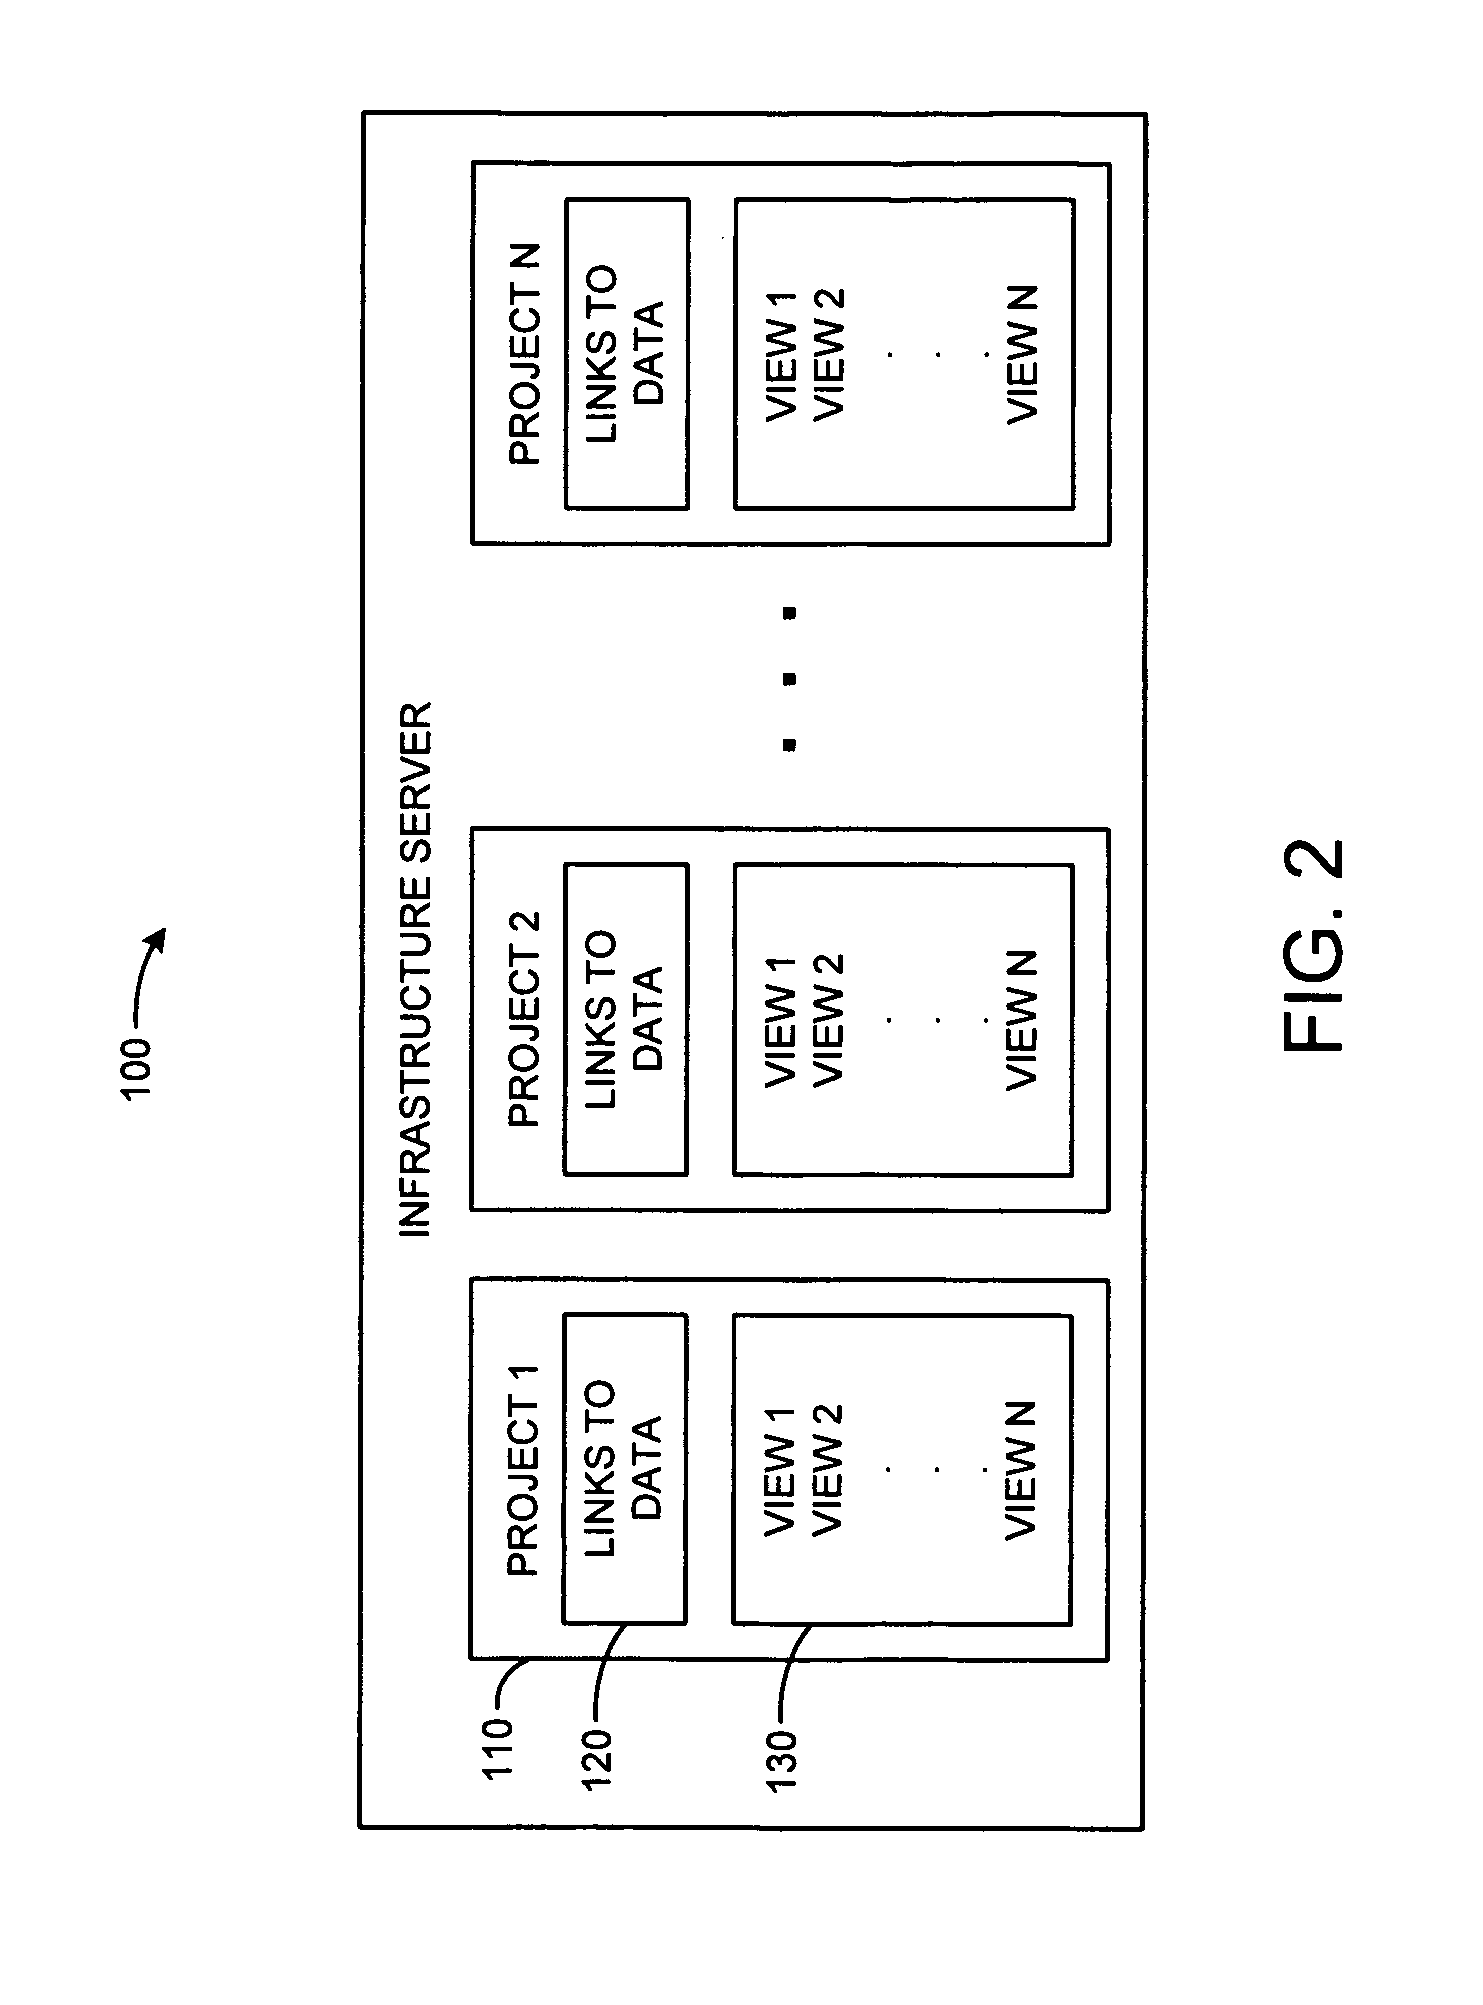 Methods and systems for facilitating online collaboration and distribution of geospatial data